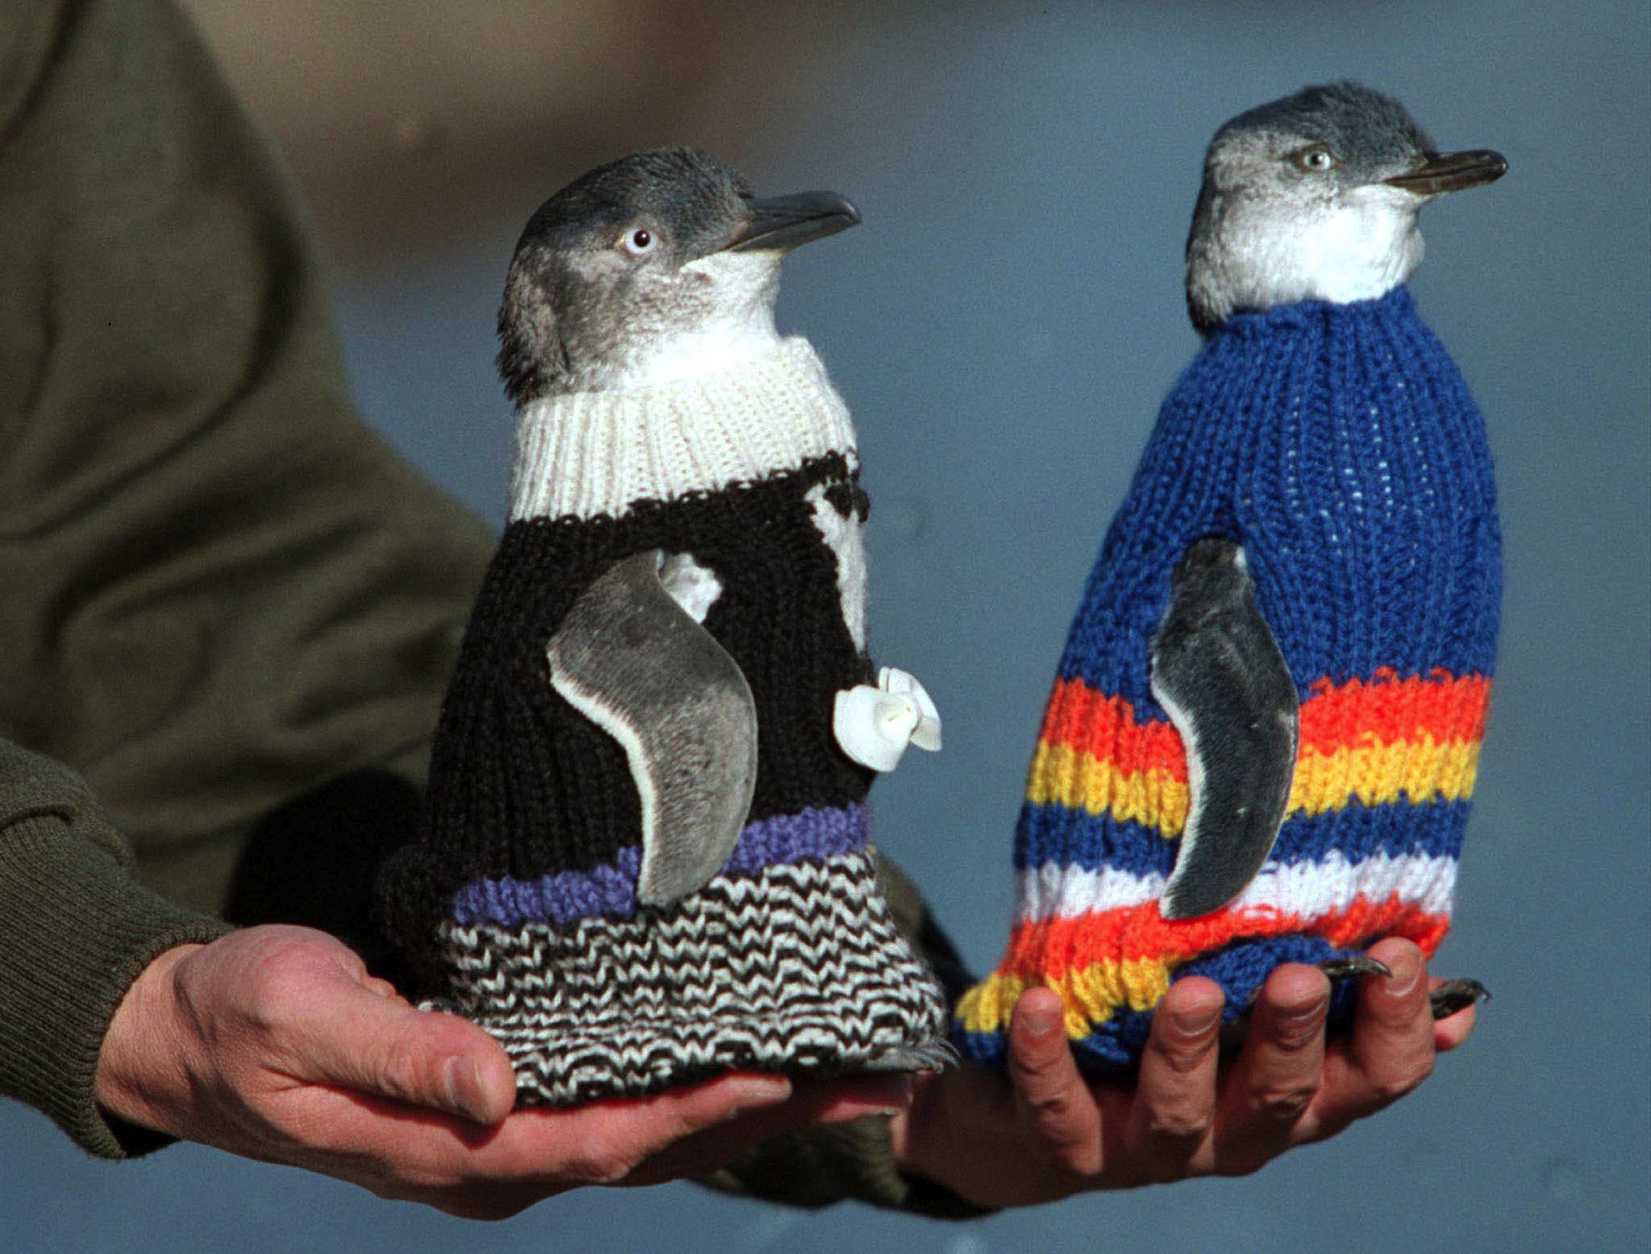 Penguin mannequins model newly-knitted protective woollen coats in Launceston, Tasmania May 22, 2001. (STR / Reuters)